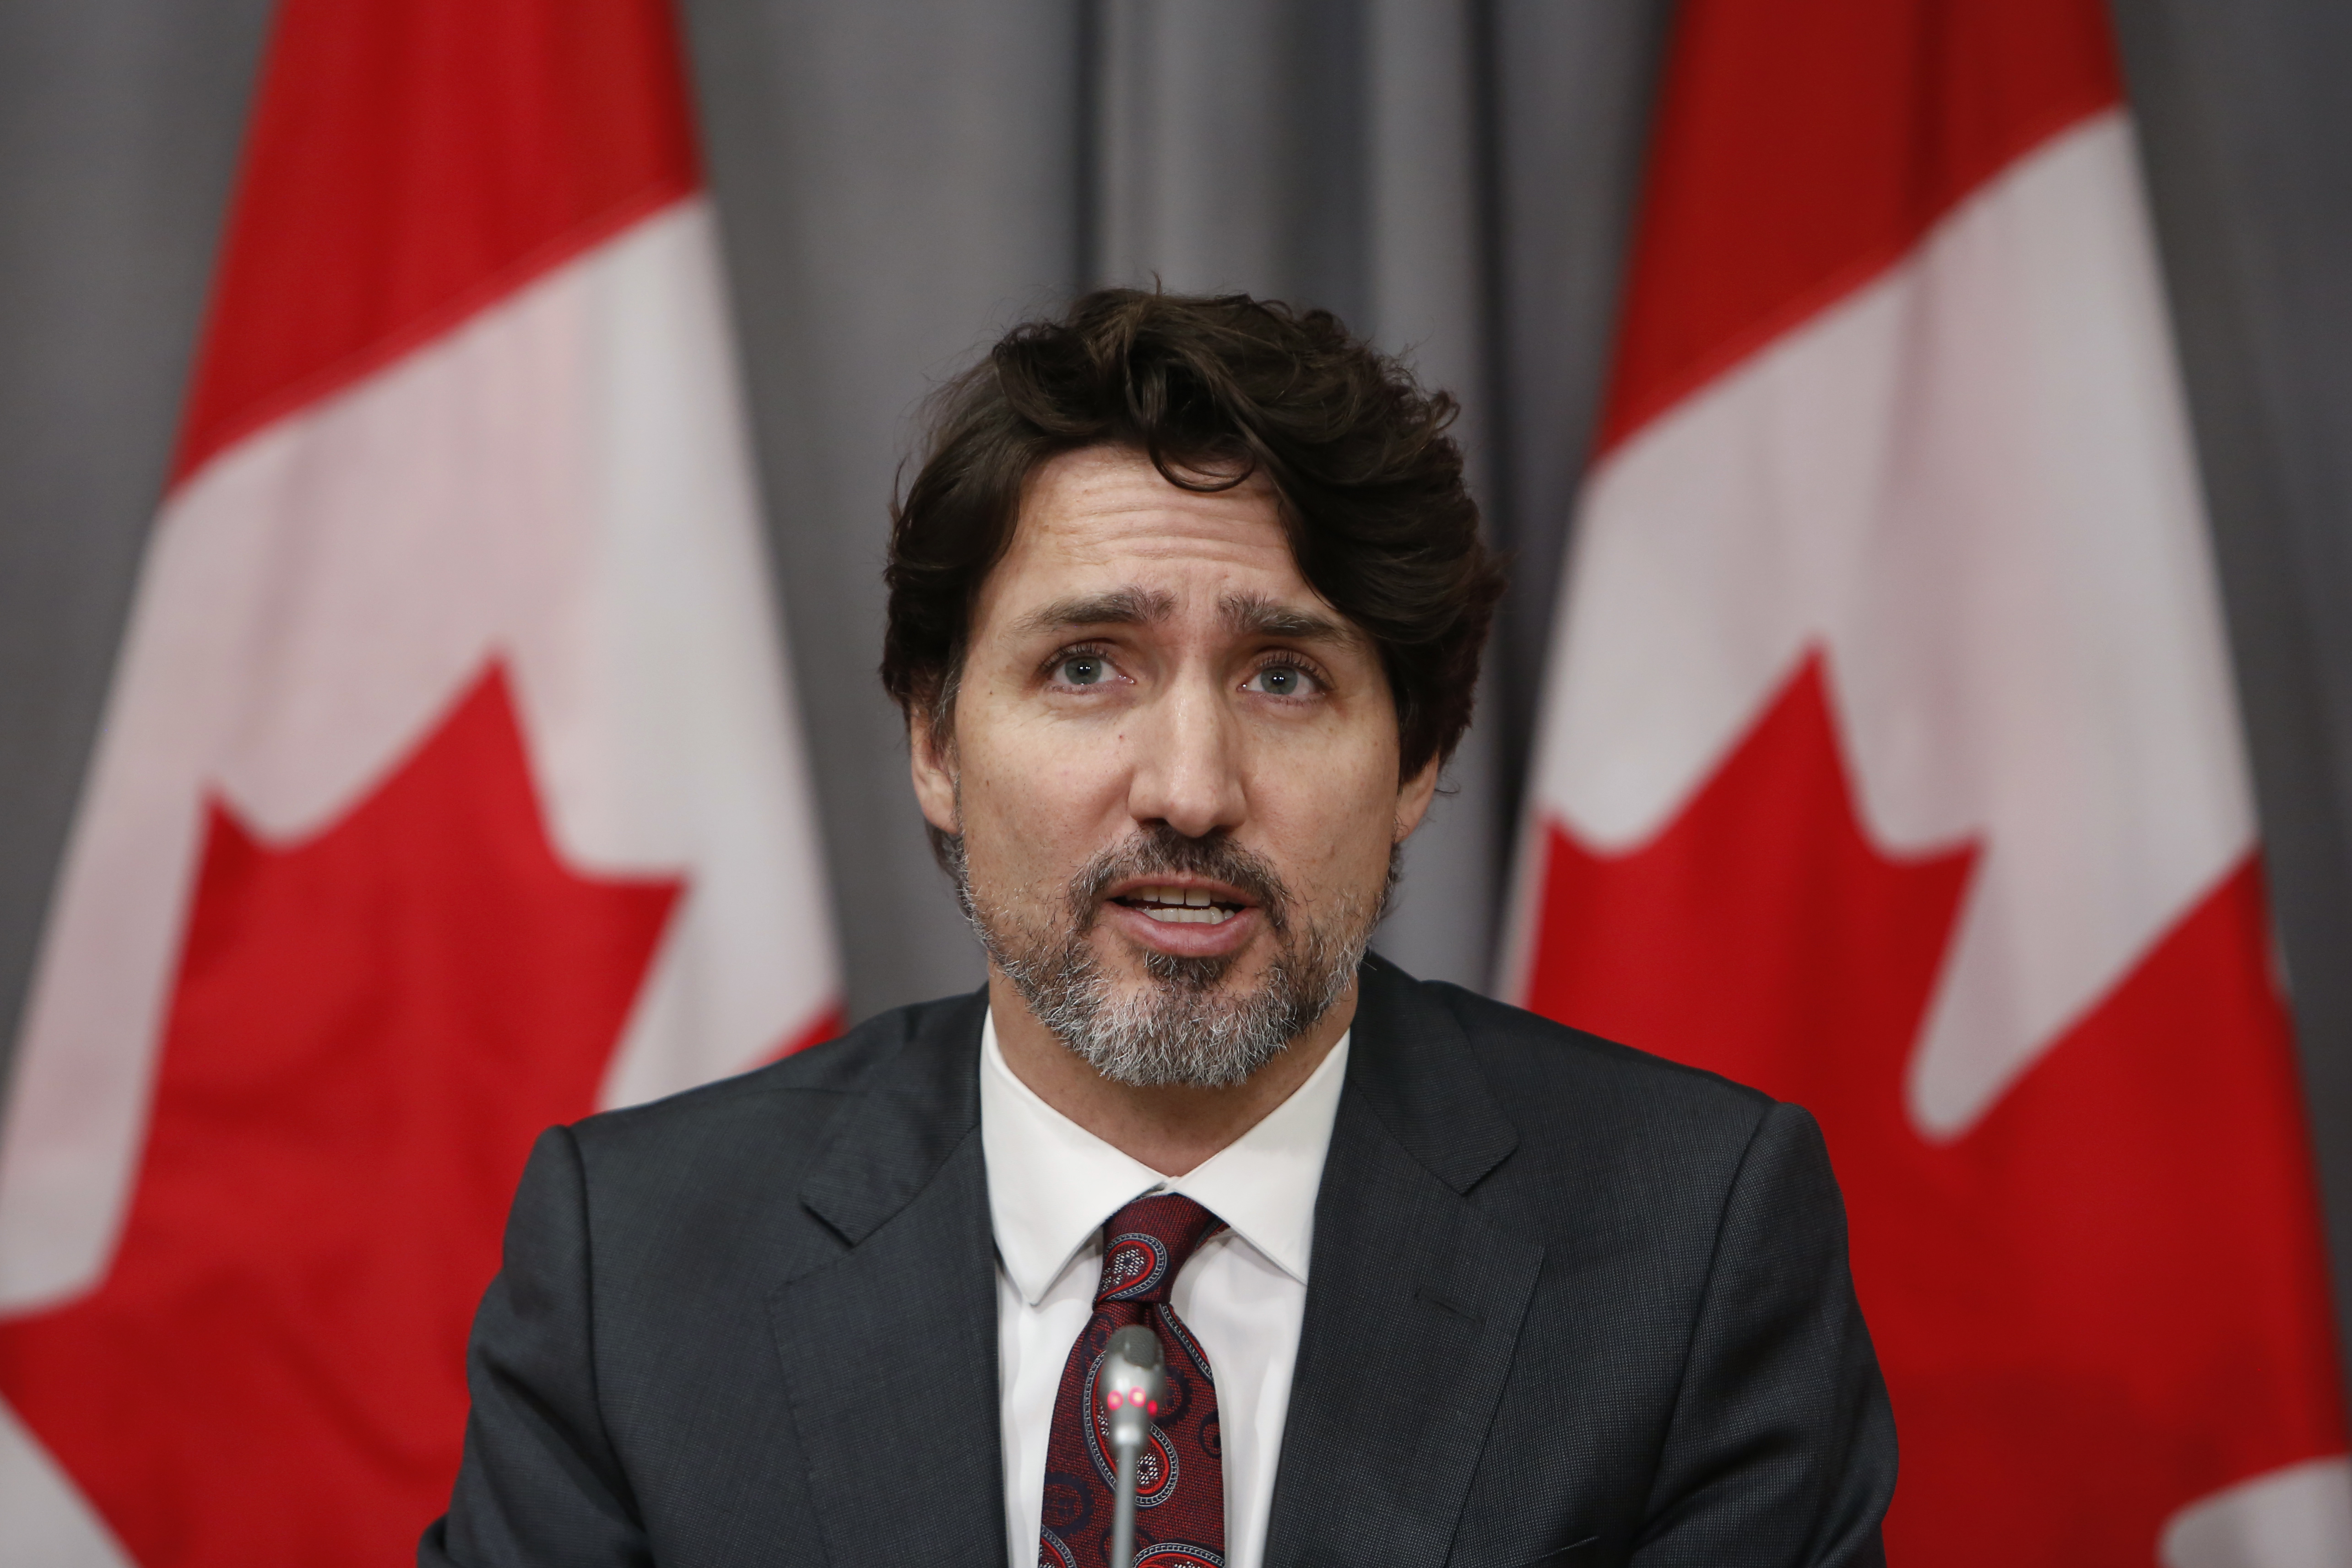 Canadian Prime Minister, Justin Trudeau, speaks during a news conference on Parliament Hill in Ottawa, Ontario, Canada, on Friday, May 1.